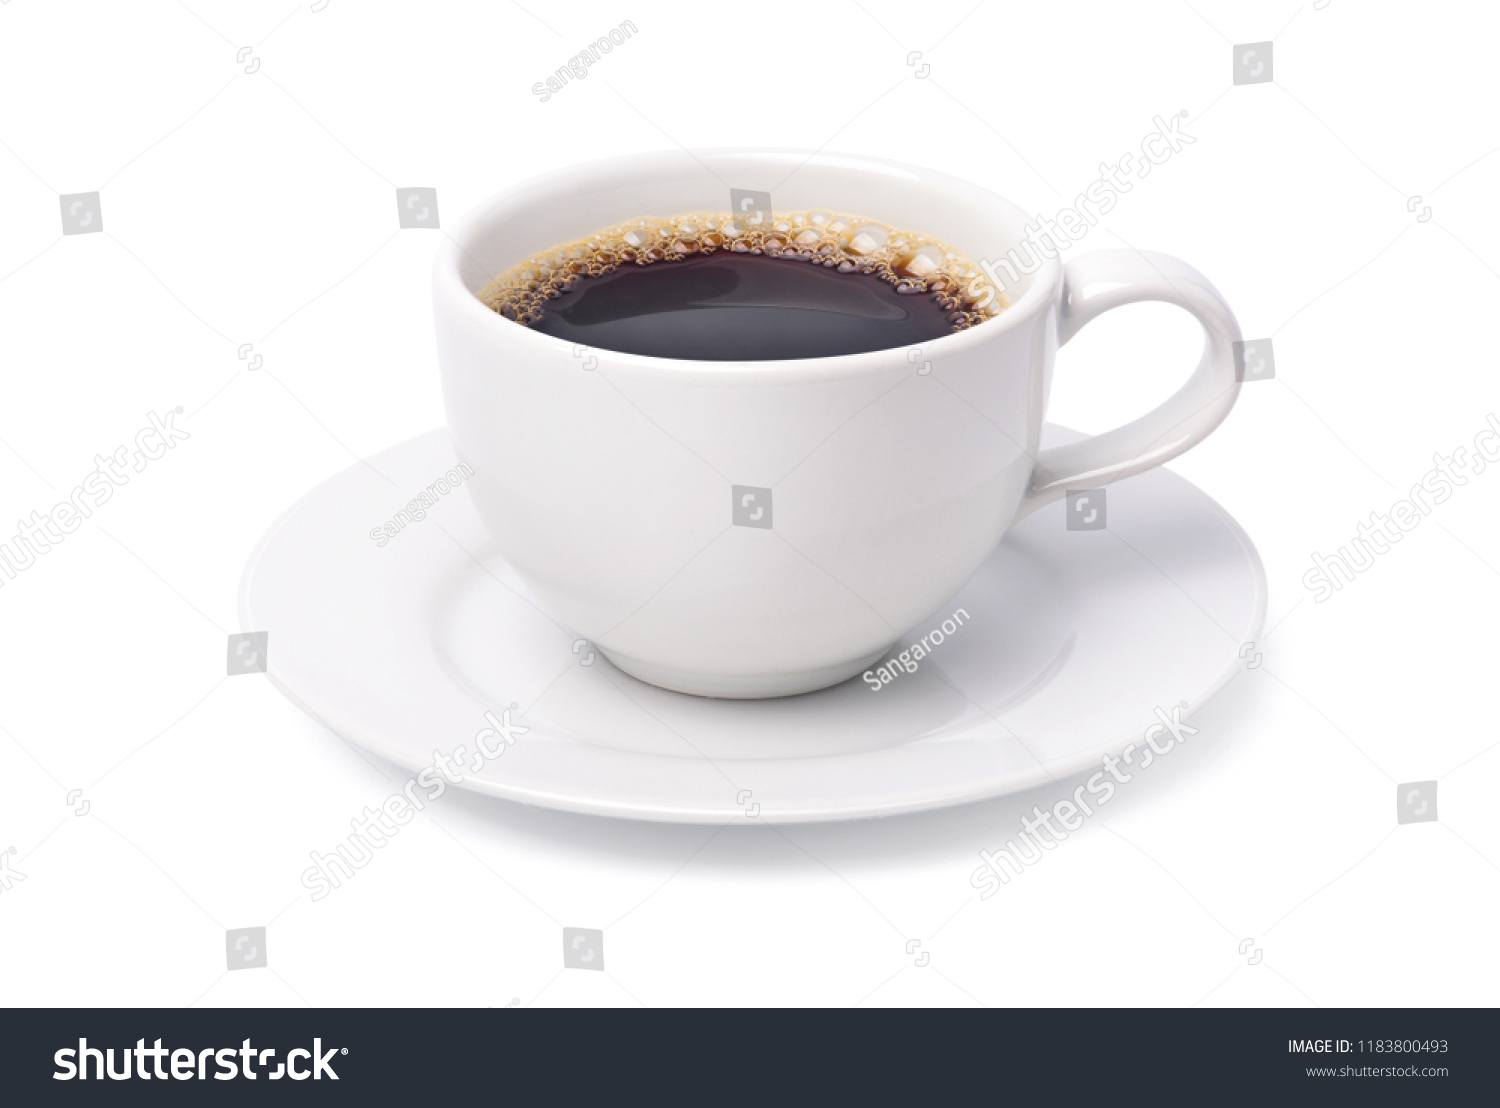 White cup of black coffee isolated on white background with clipping path #1183800493